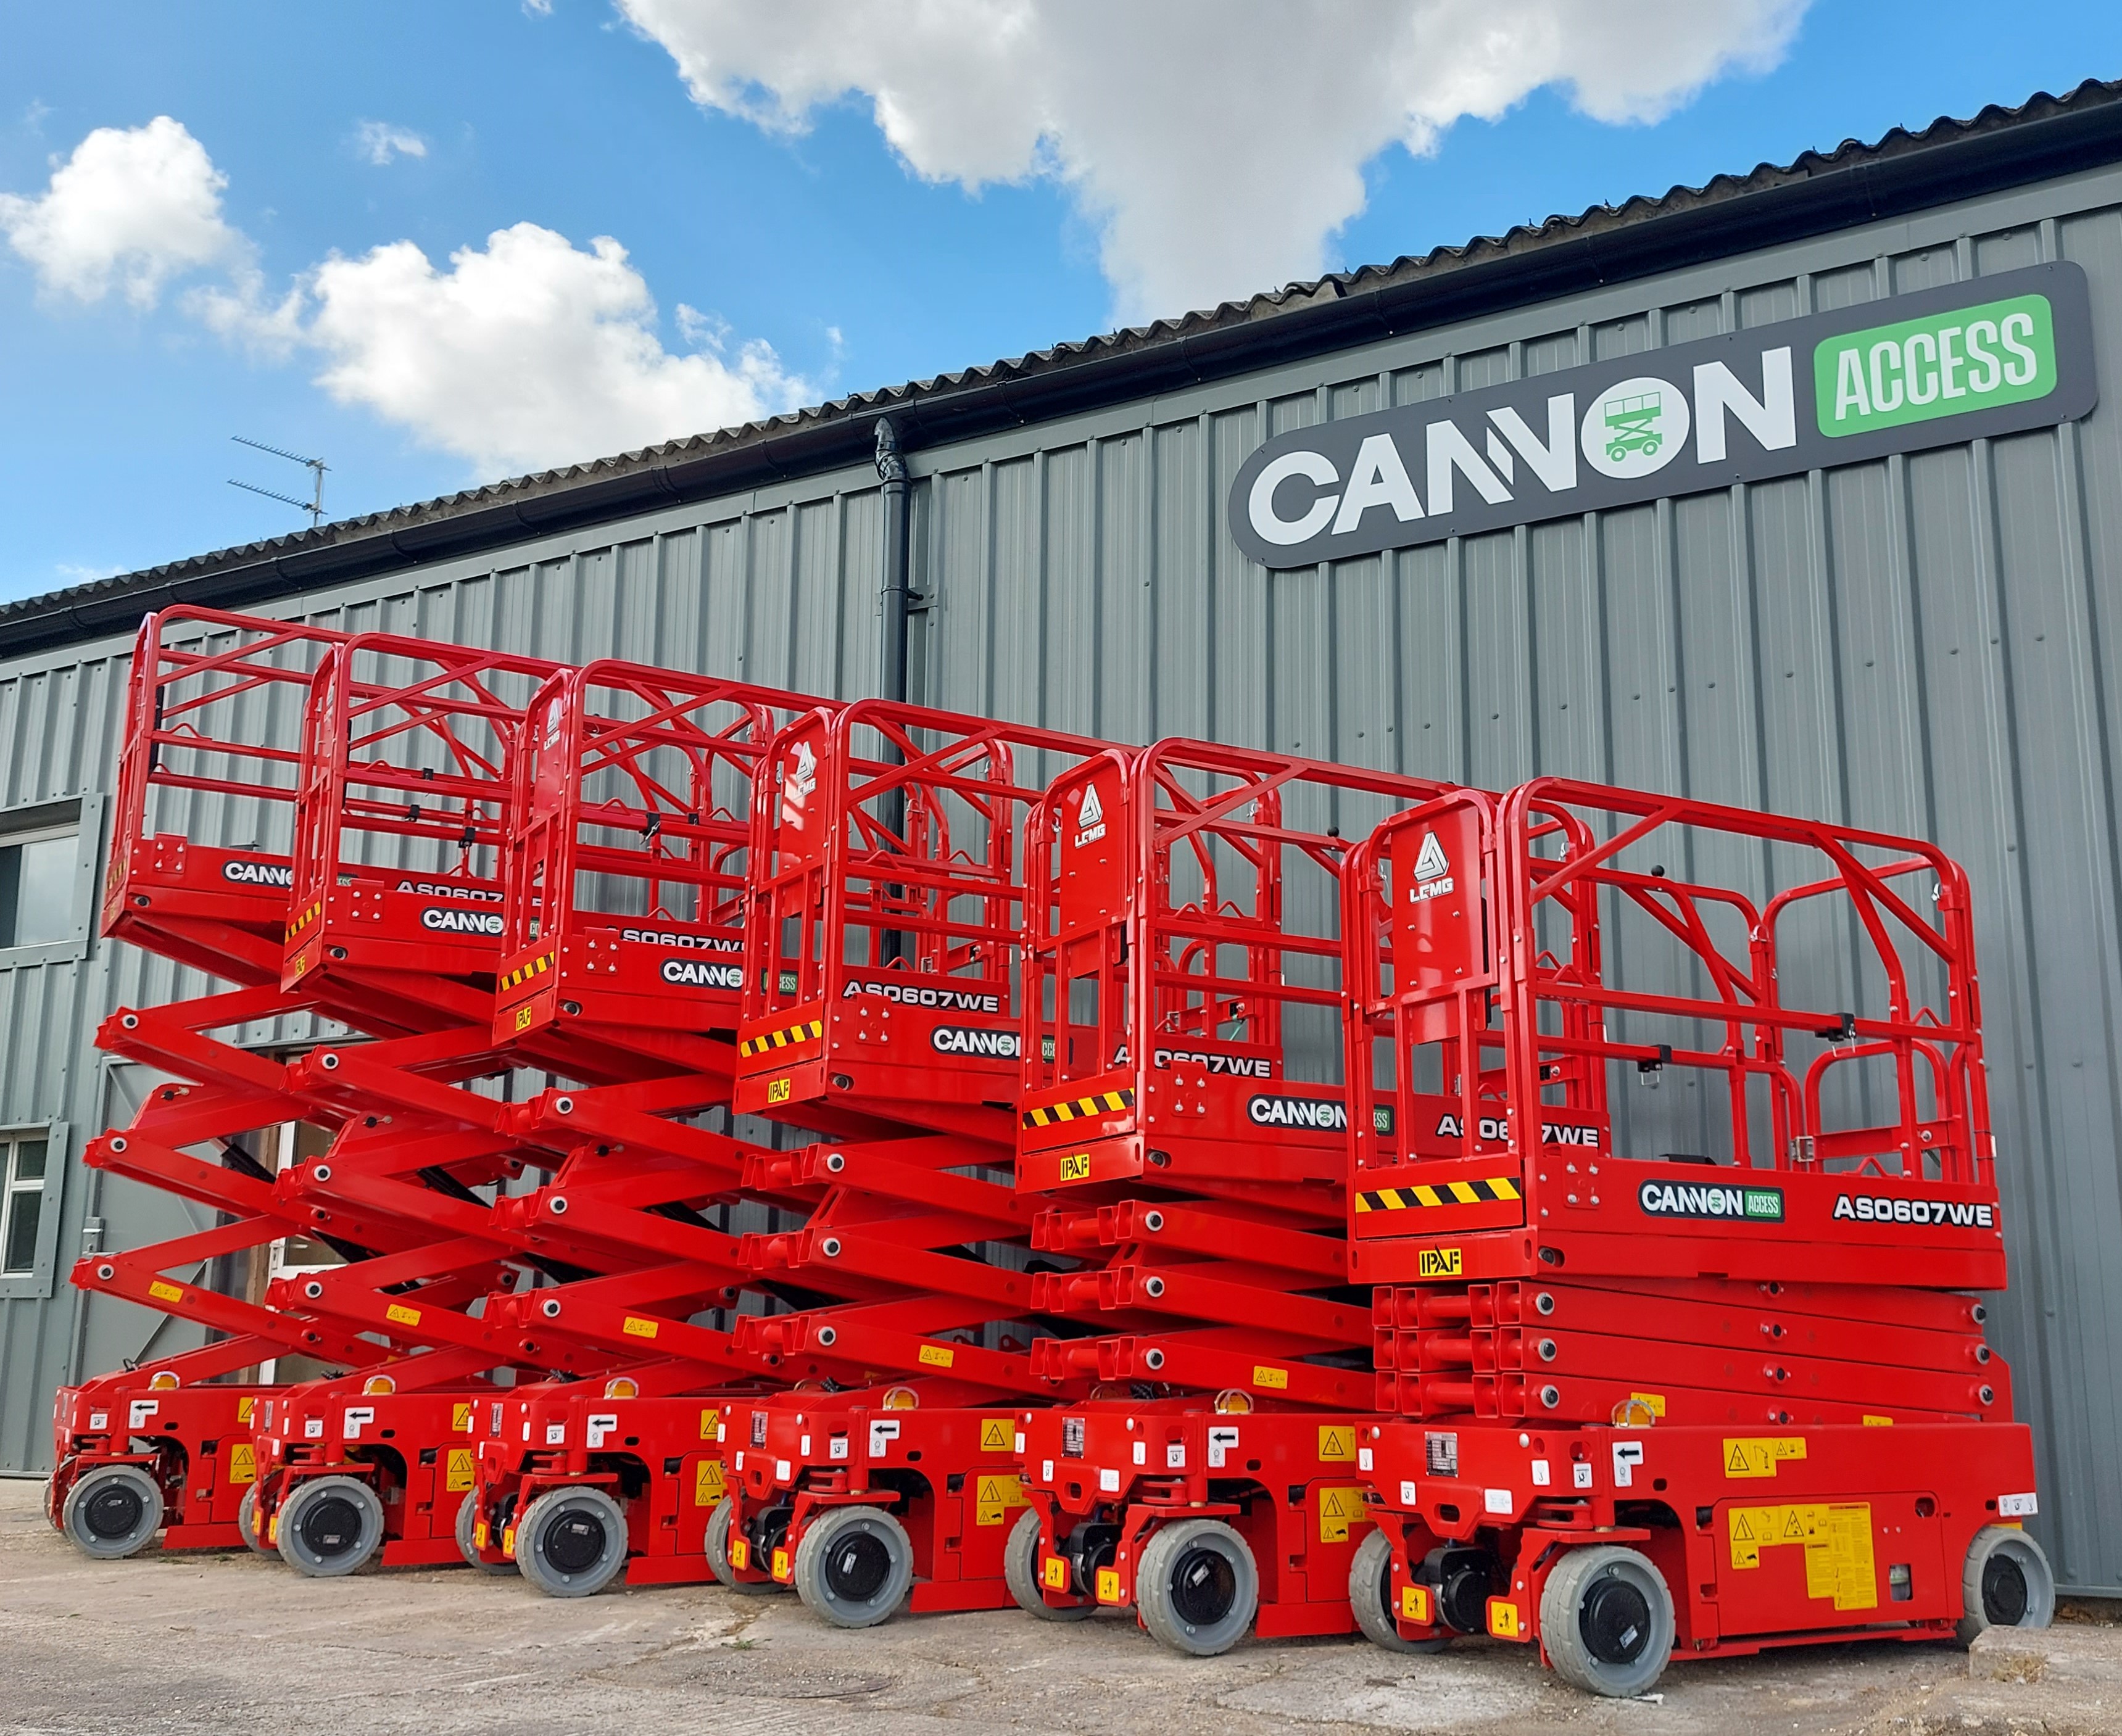 LGMG quality will impress our customers says Cannon Access